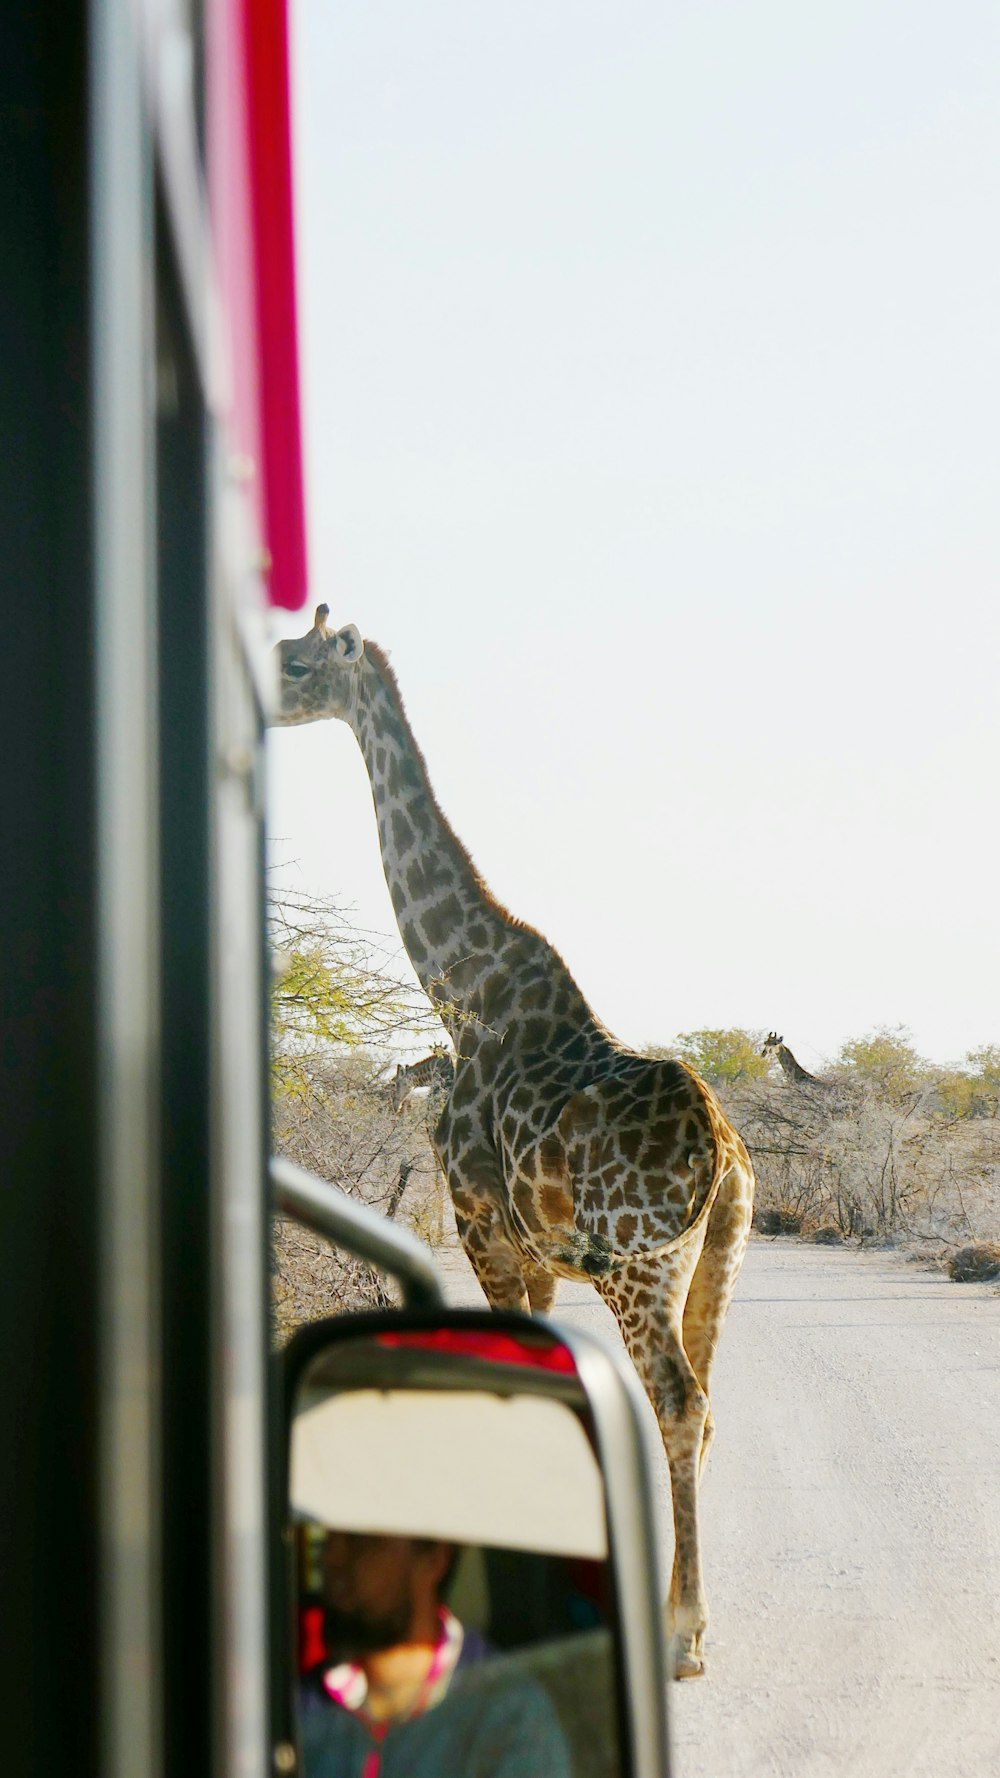 a giraffe standing next to a car on a road